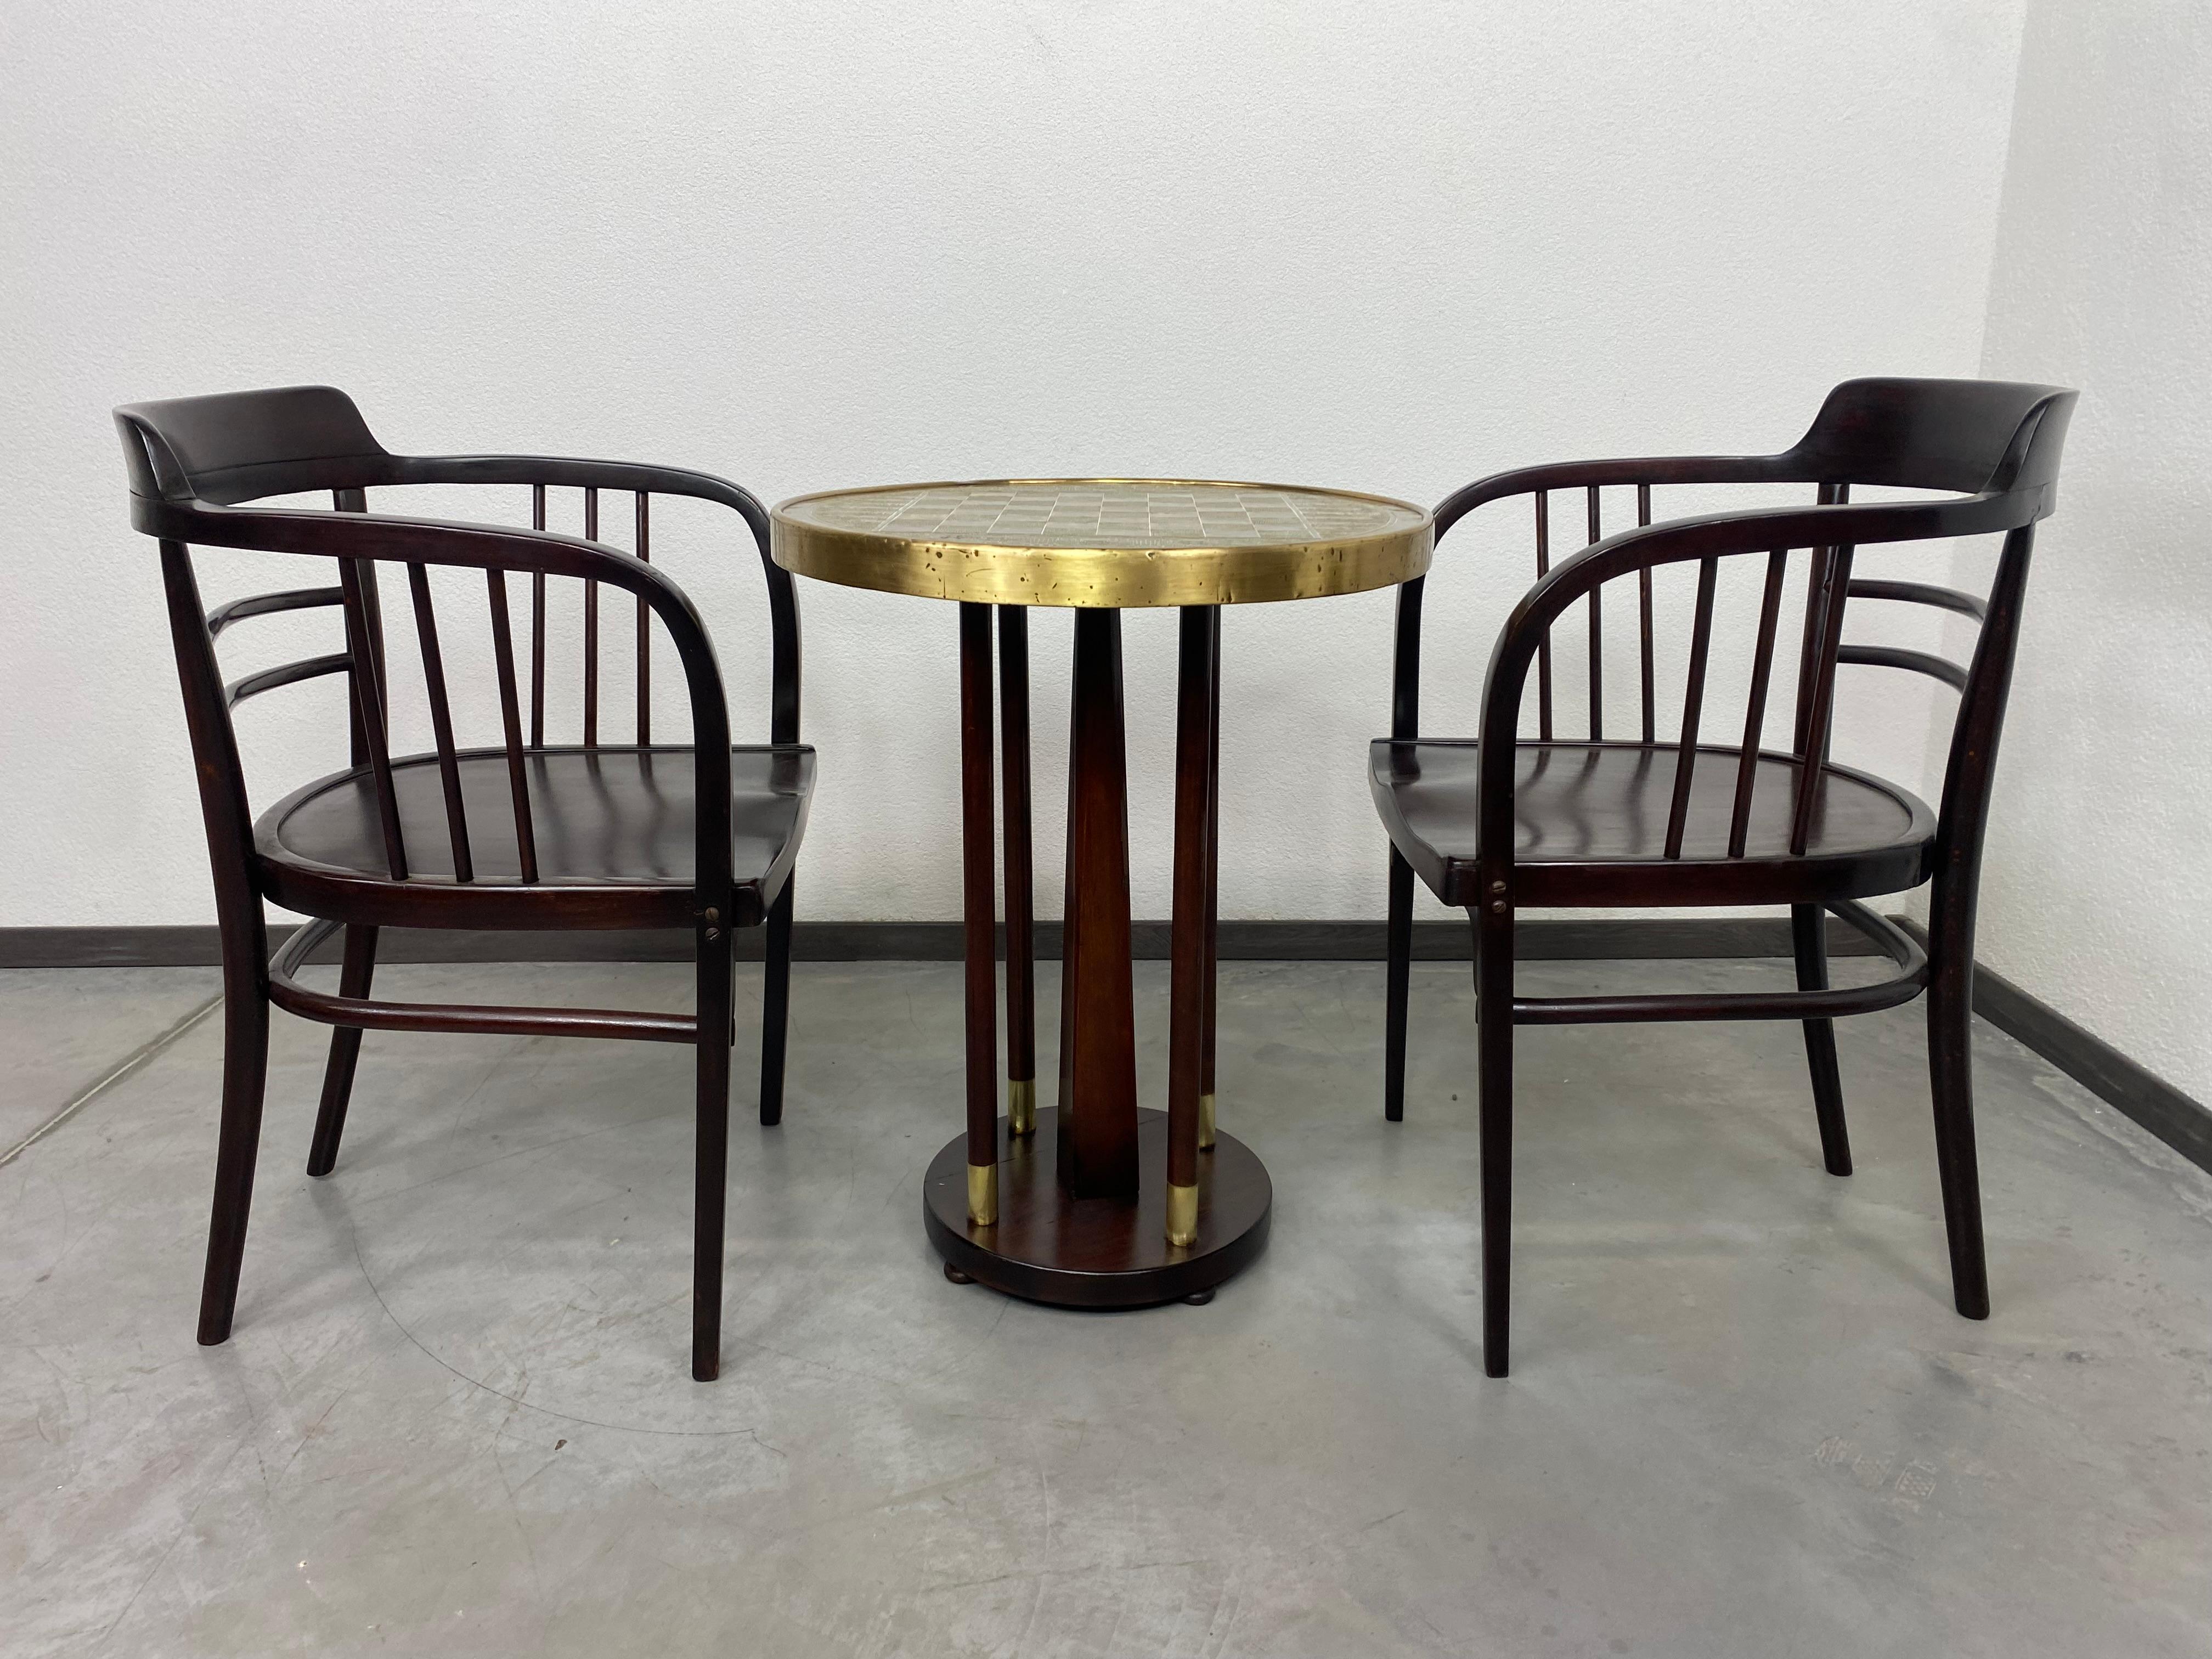 Secession chess table with hammered brass top, professionally stained and repolished.